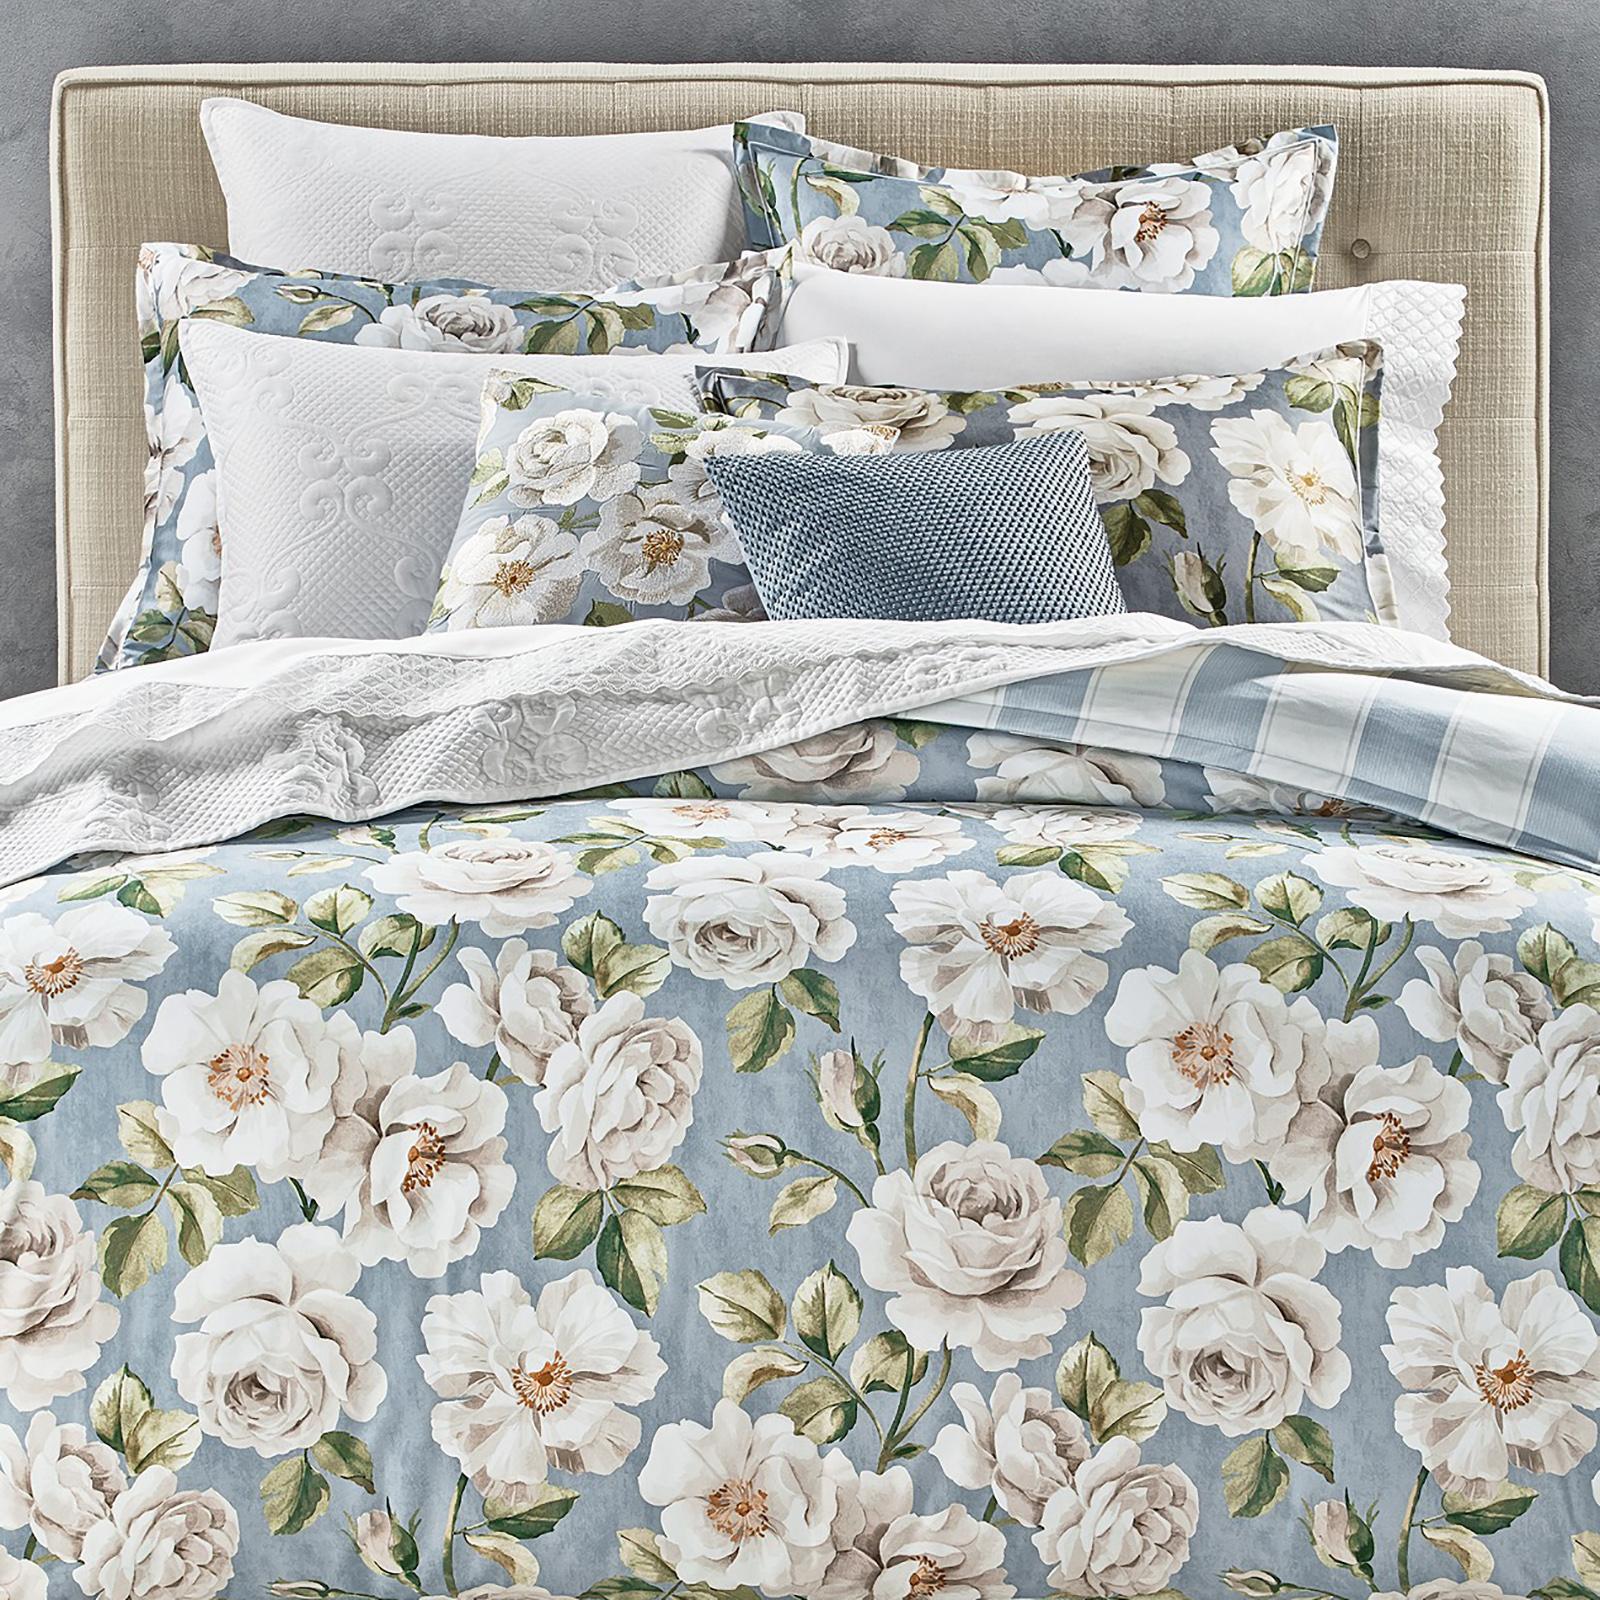 hotel collection bedding